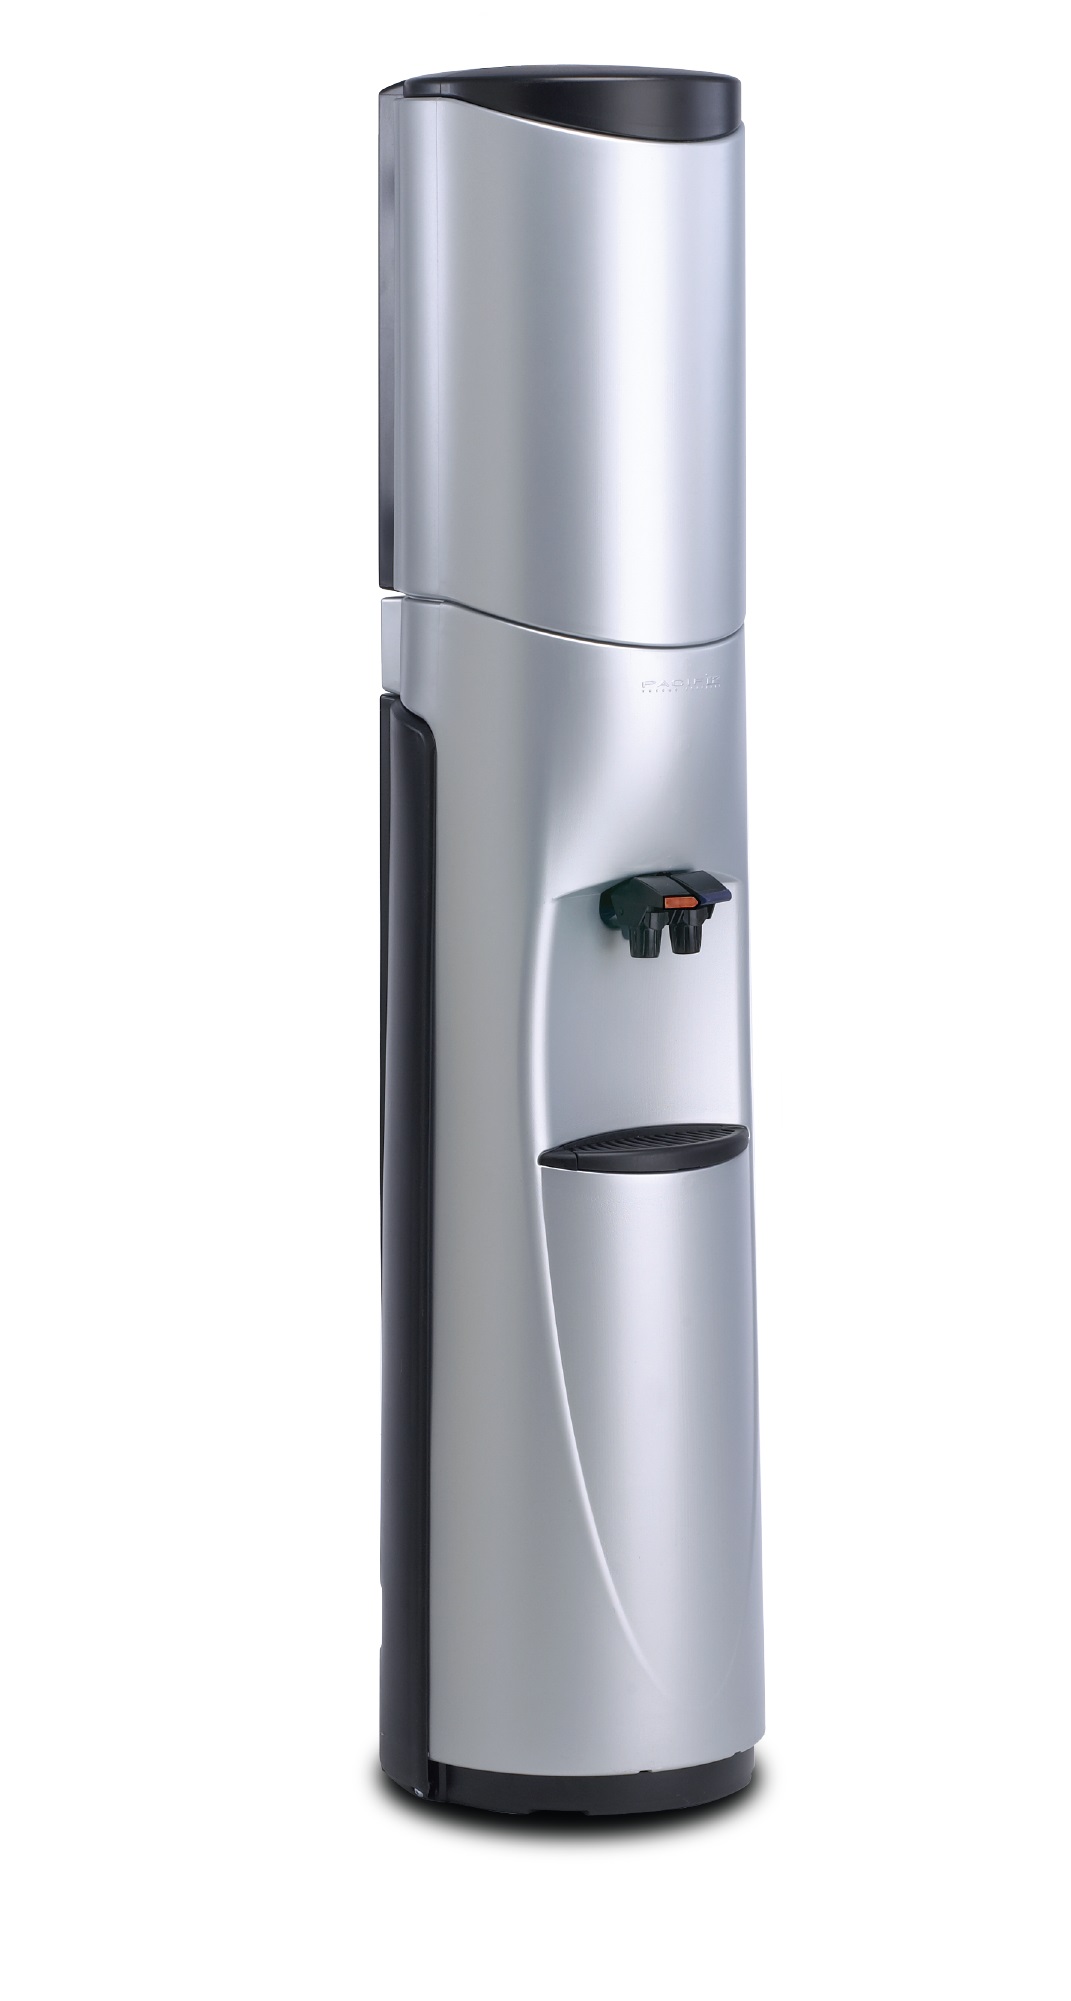 Pacifik High Tech Bottleless Water Cooler in Silver with Black Trim - Hot/Cold